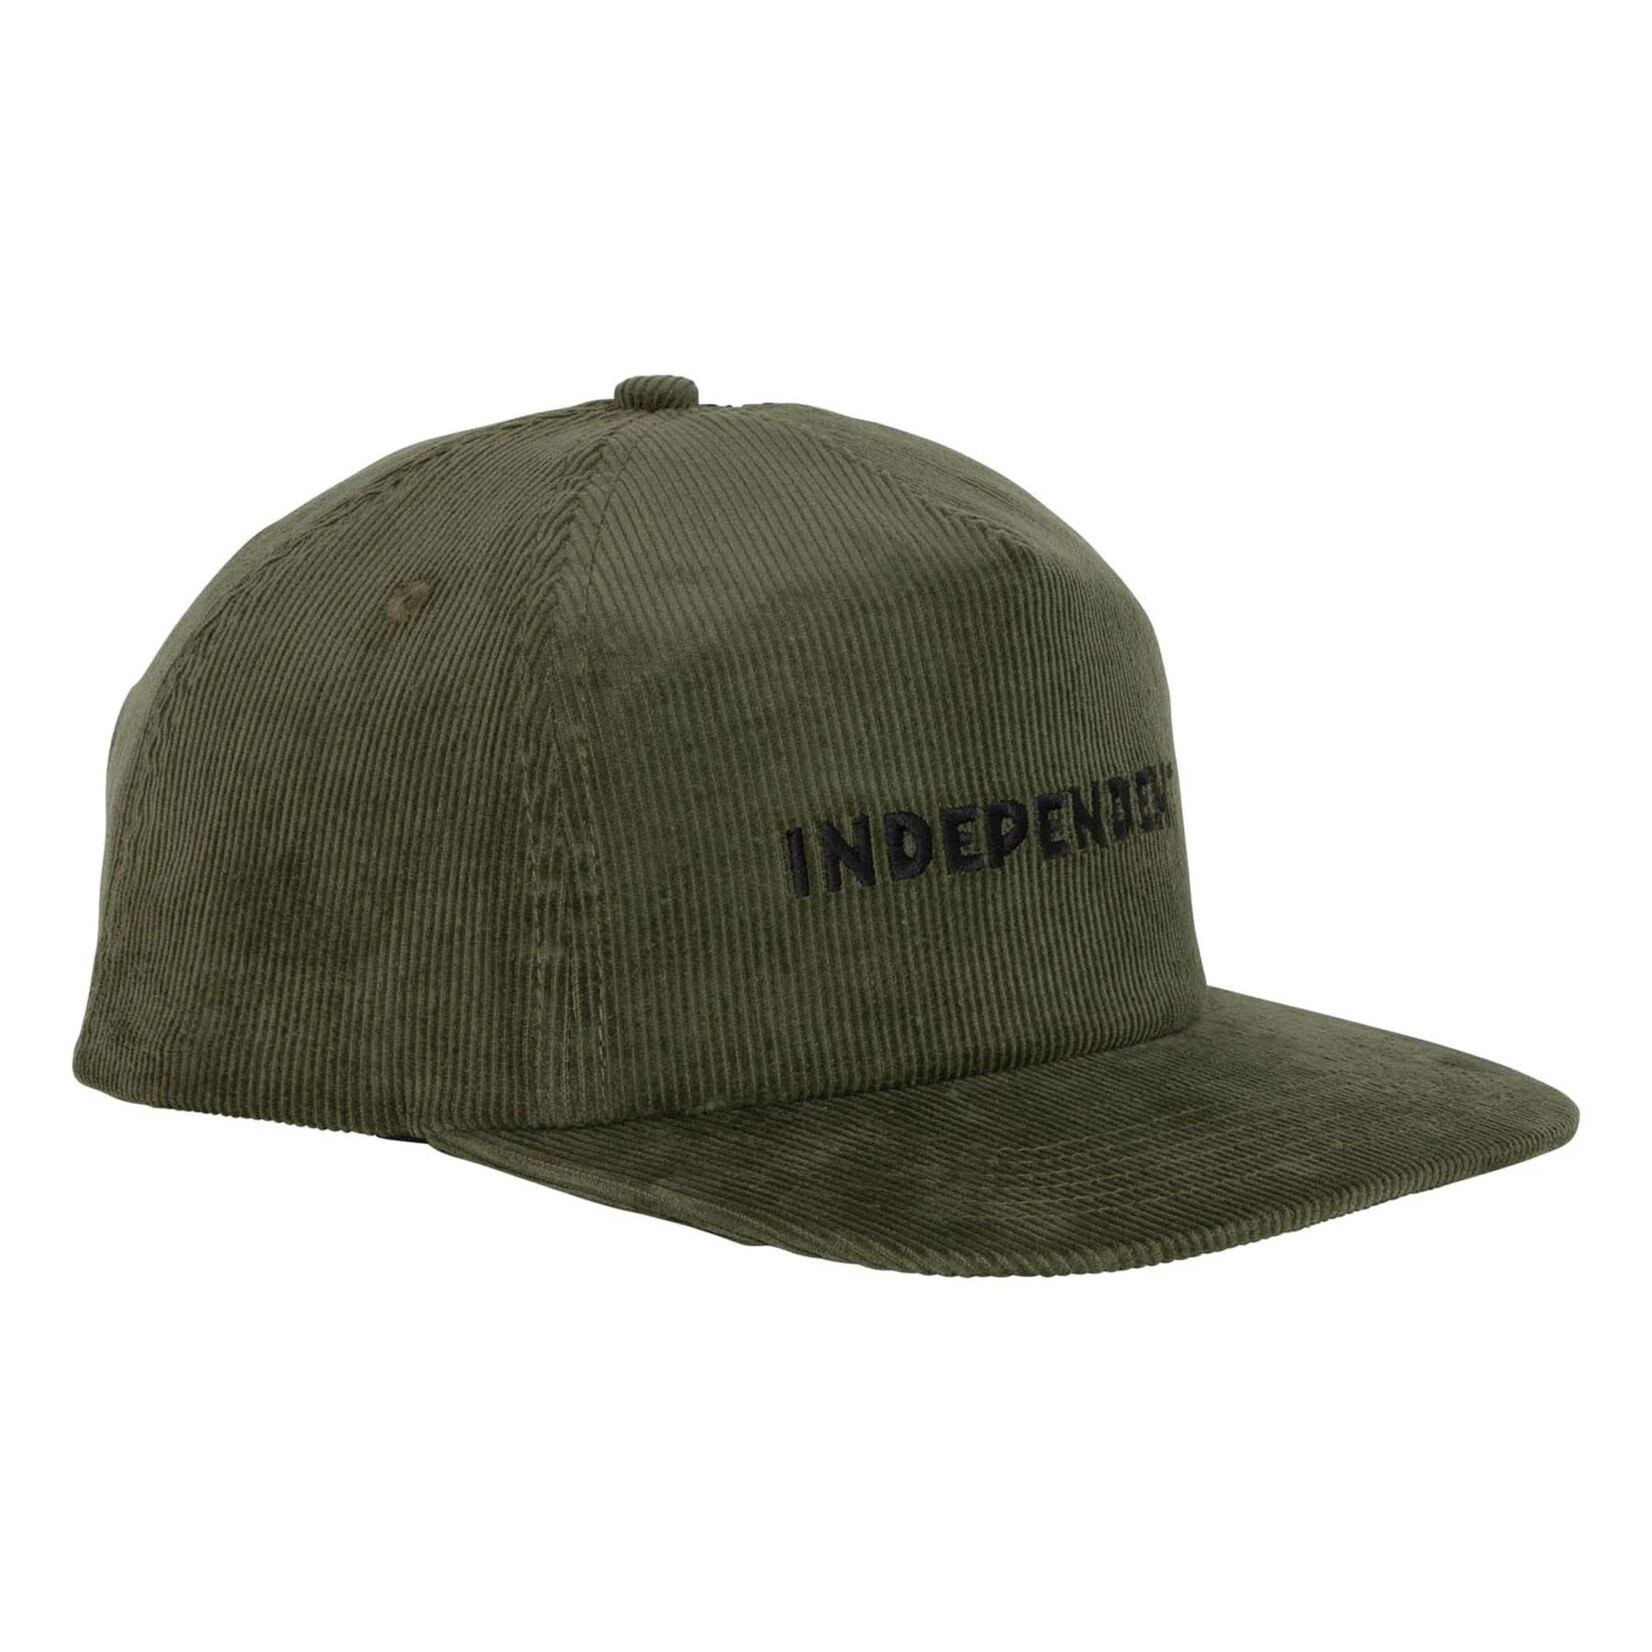 Independent Independent Beacon Snapback Hat - Olive